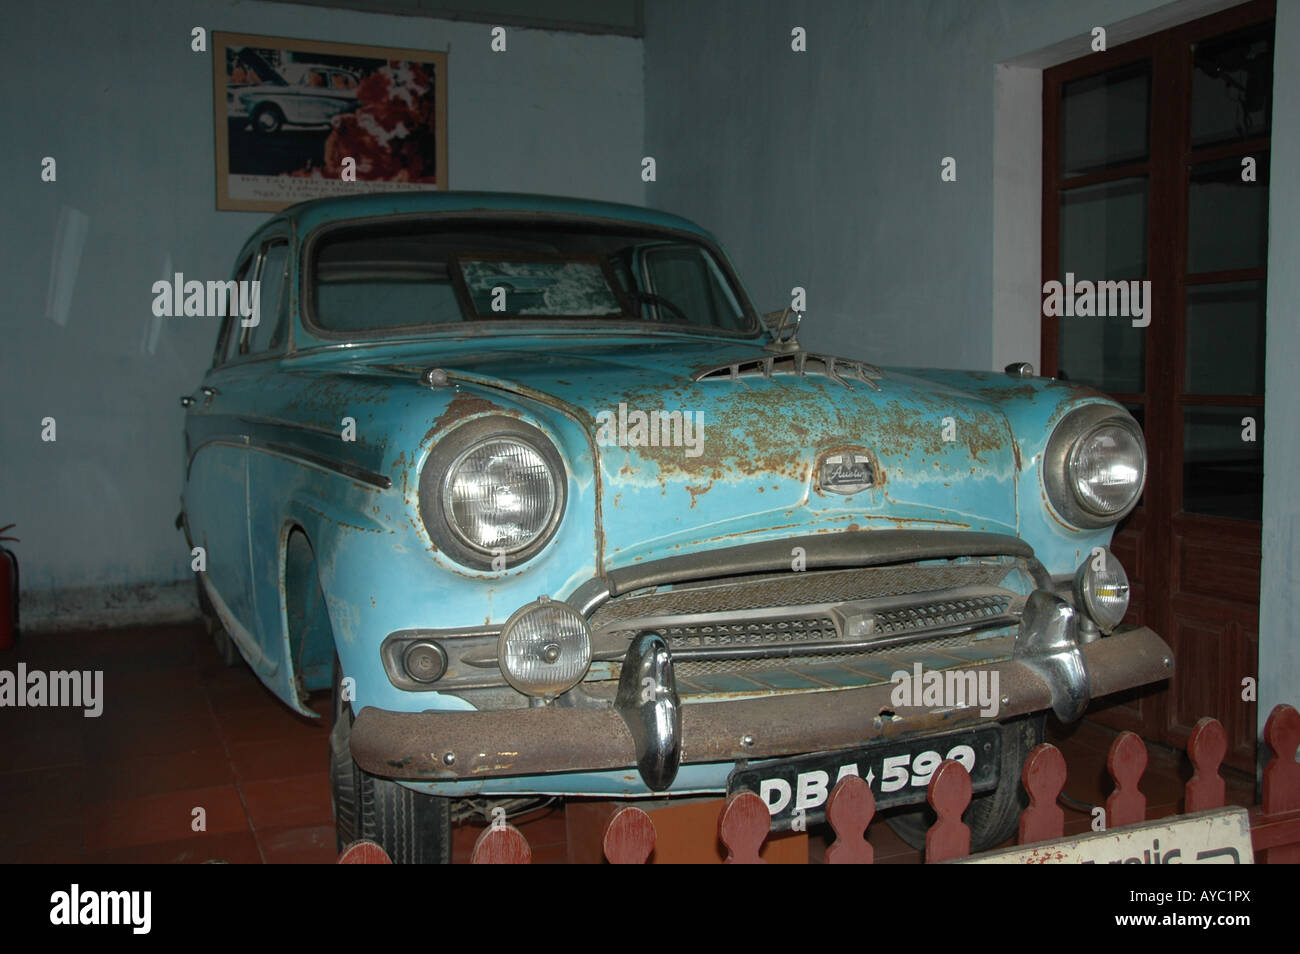 Blue Austin in which The monk, The Most Venerable Thich Quang Duc drove to Saigon before burning himself to death. Stock Photo